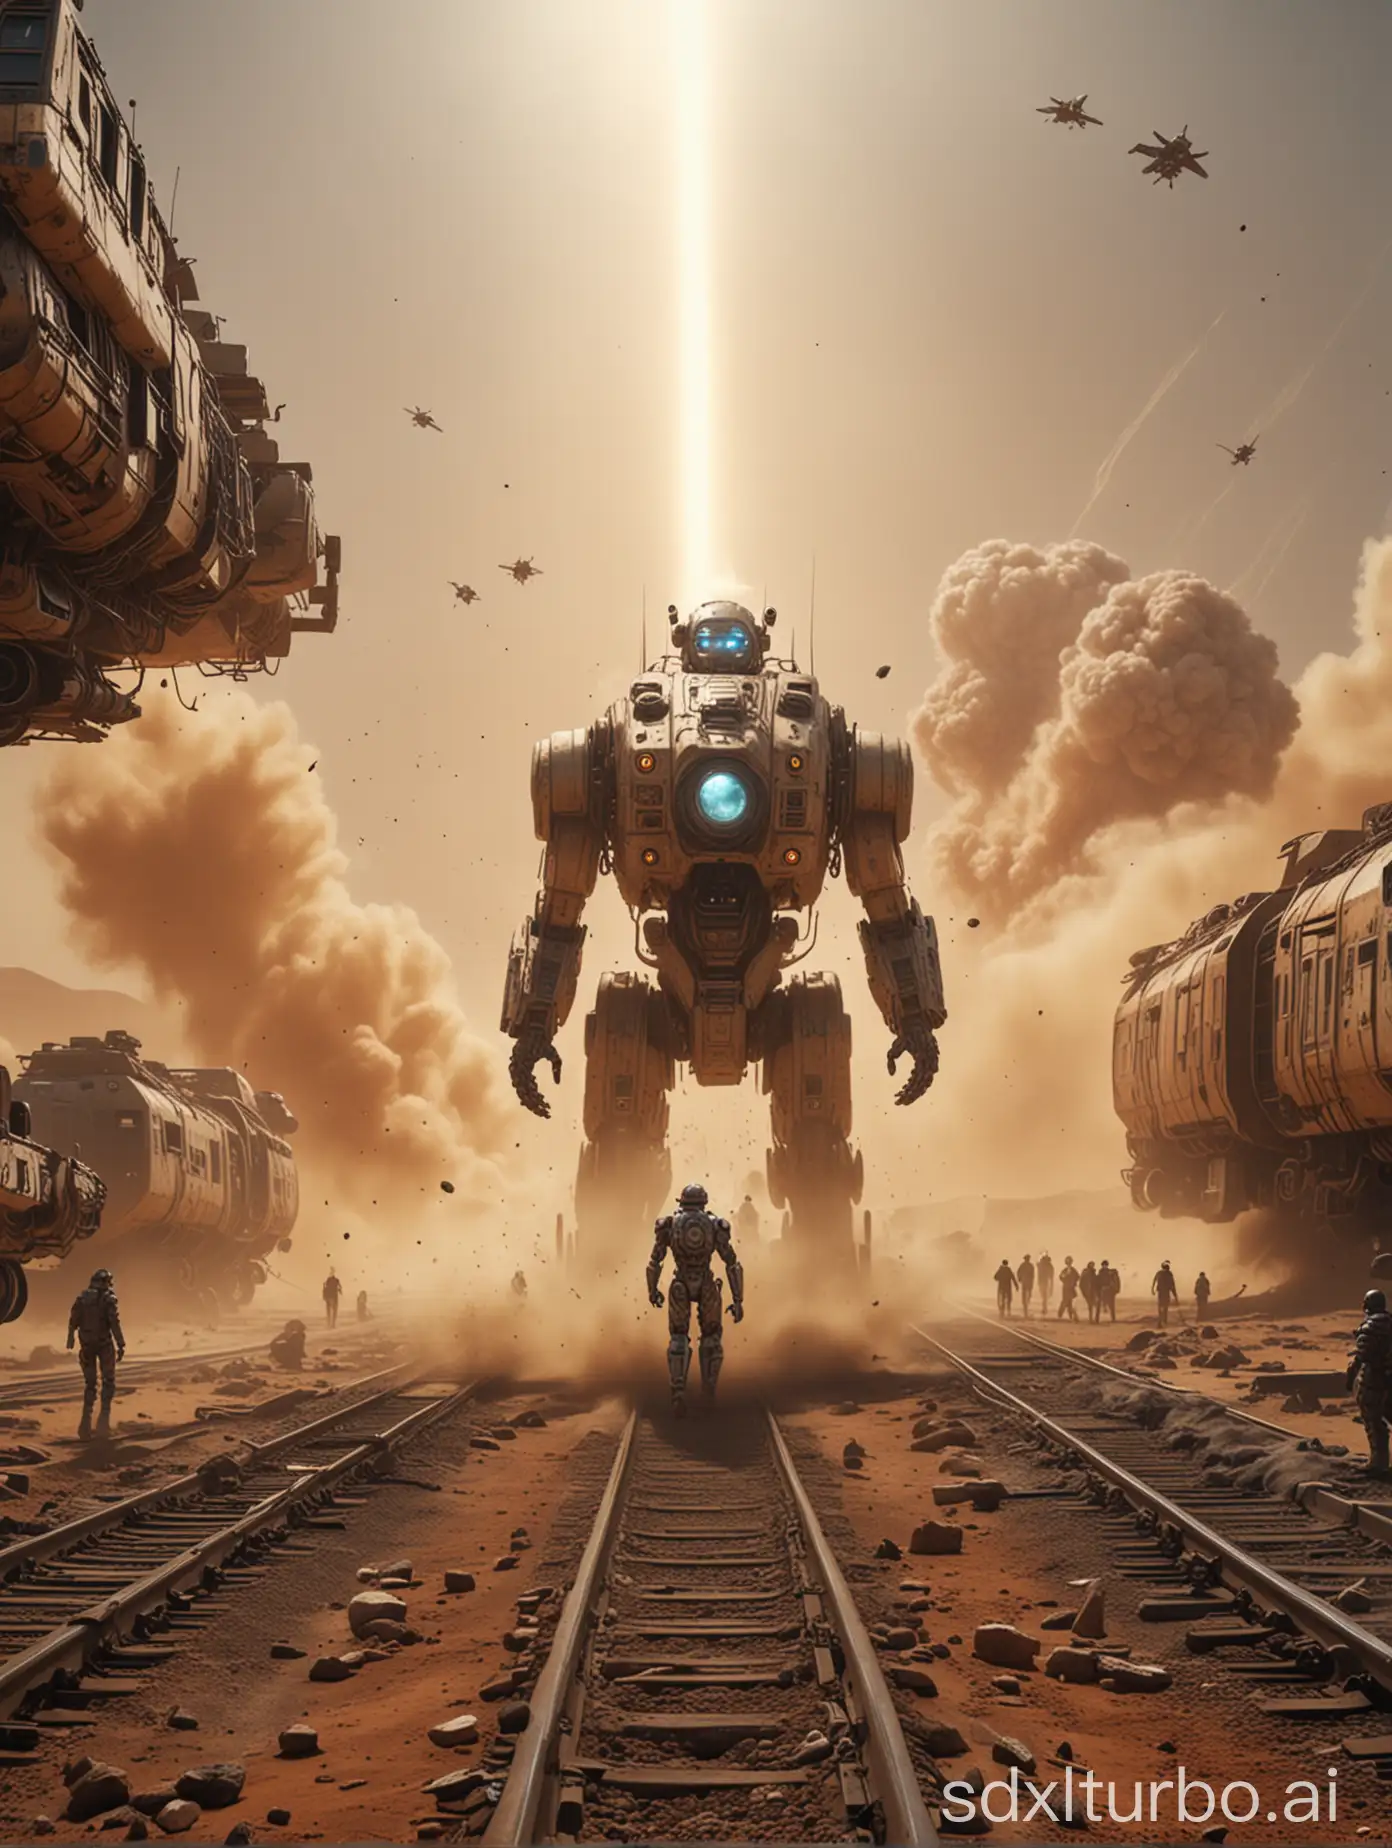 Hyperrealism, future space, robots, standing out as humans launch a spaceship into the dusty apocalyptic sky, mechanical, trains passing by in the sky, sandstorm, earth, laser beams, lively scene, armor, cables, intense perspective space, cinematic scenes, virtual space, 8k